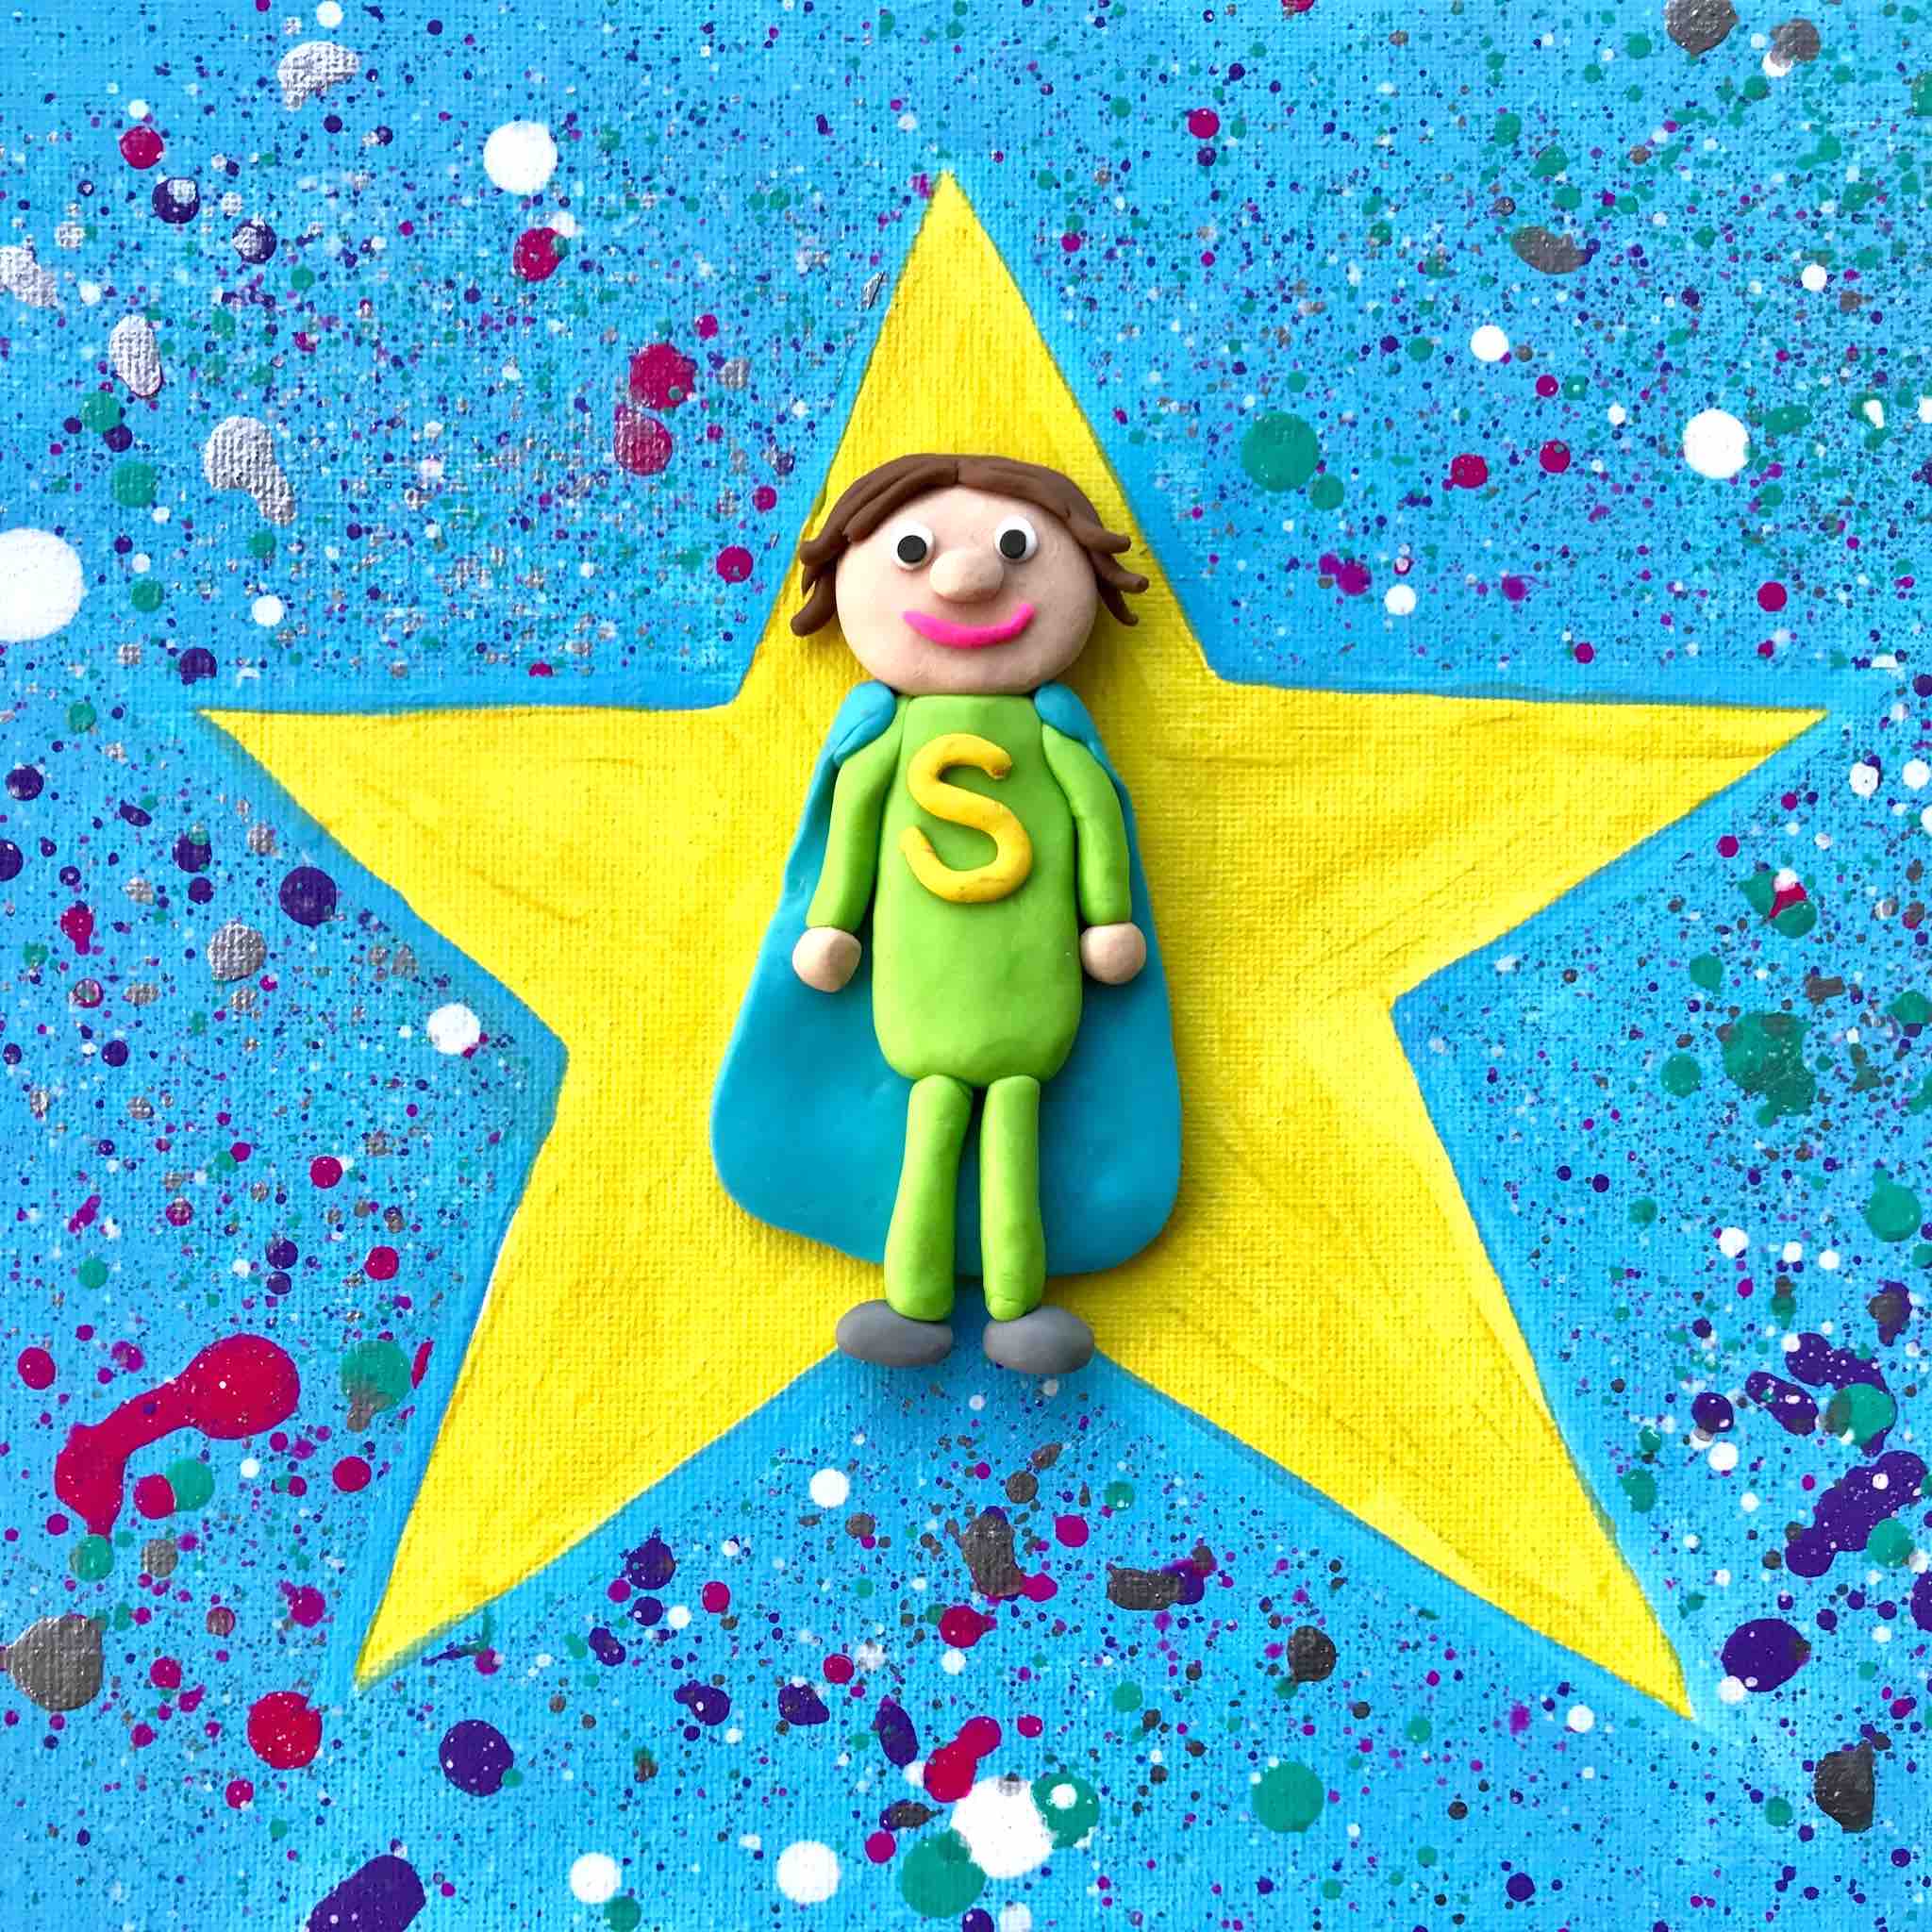 Create Art Studio Polymer clay birthday party in Toronto for ages 7 and up